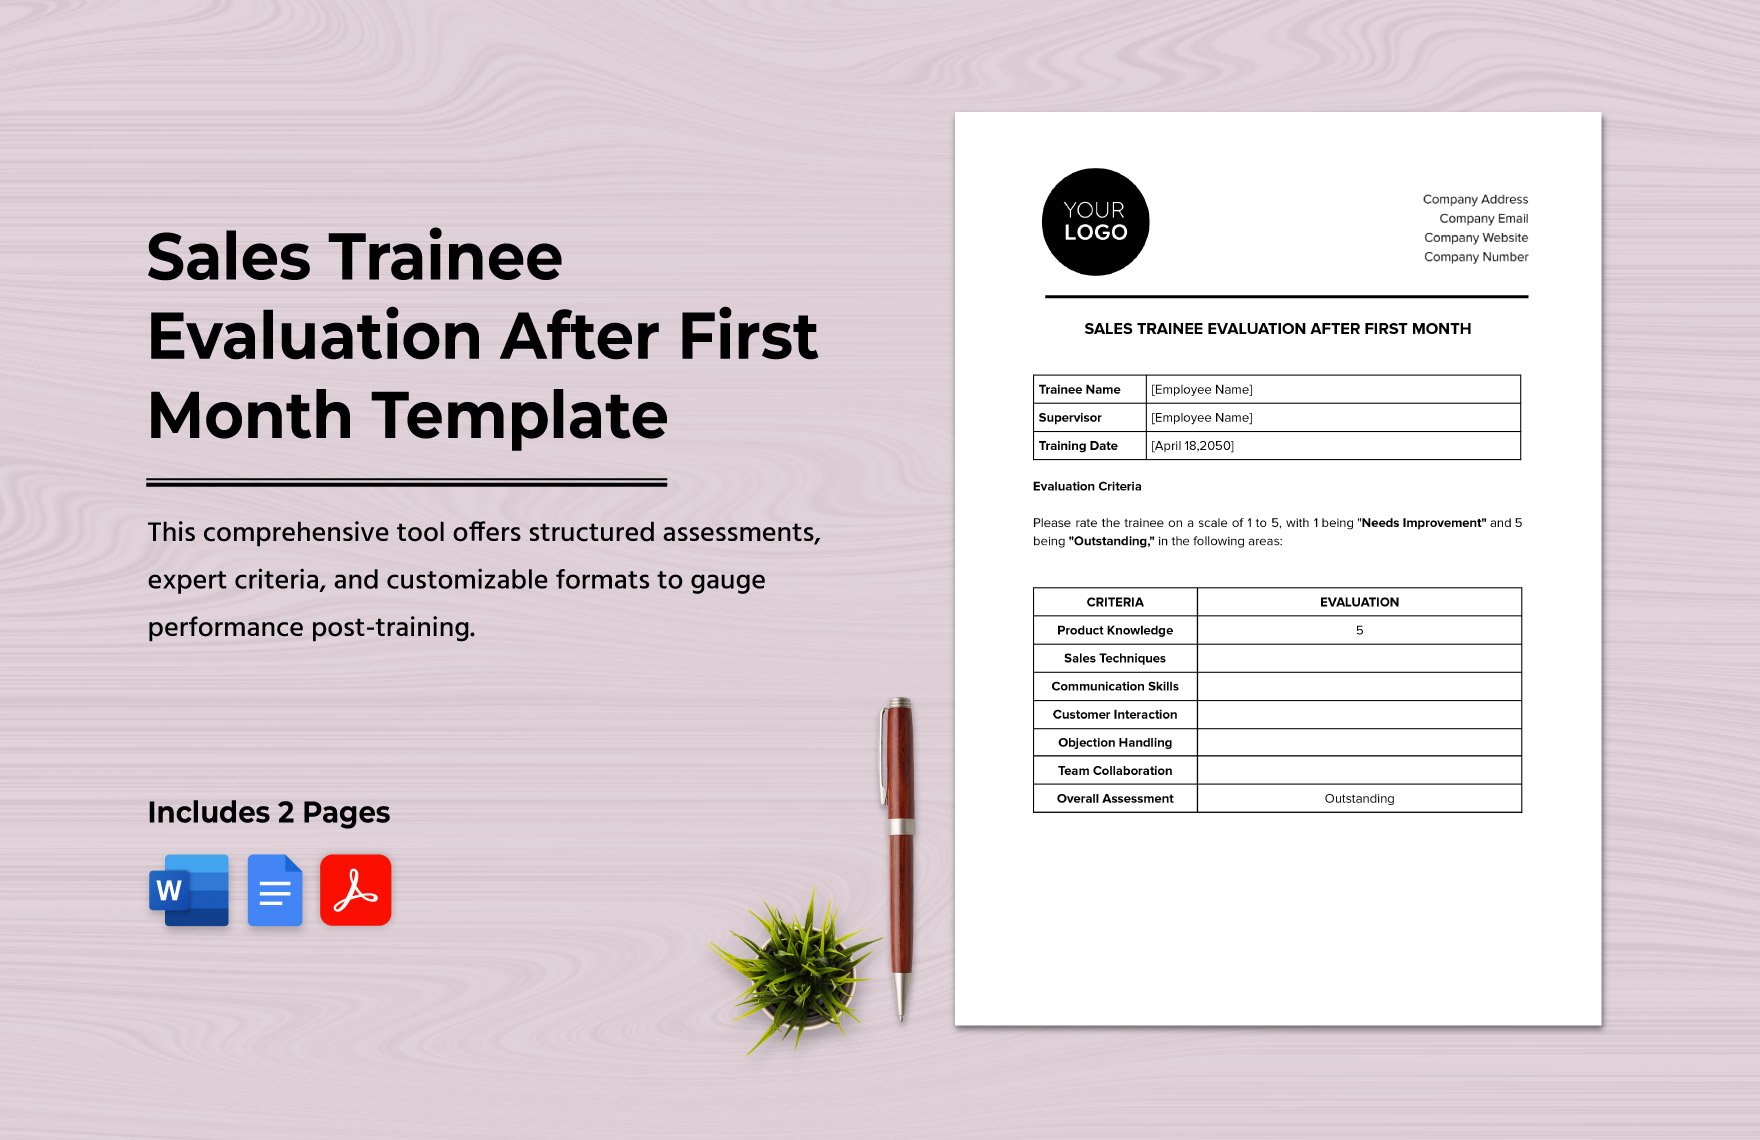 Sales Trainee Evaluation After First Month Template in Word, Google Docs, PDF